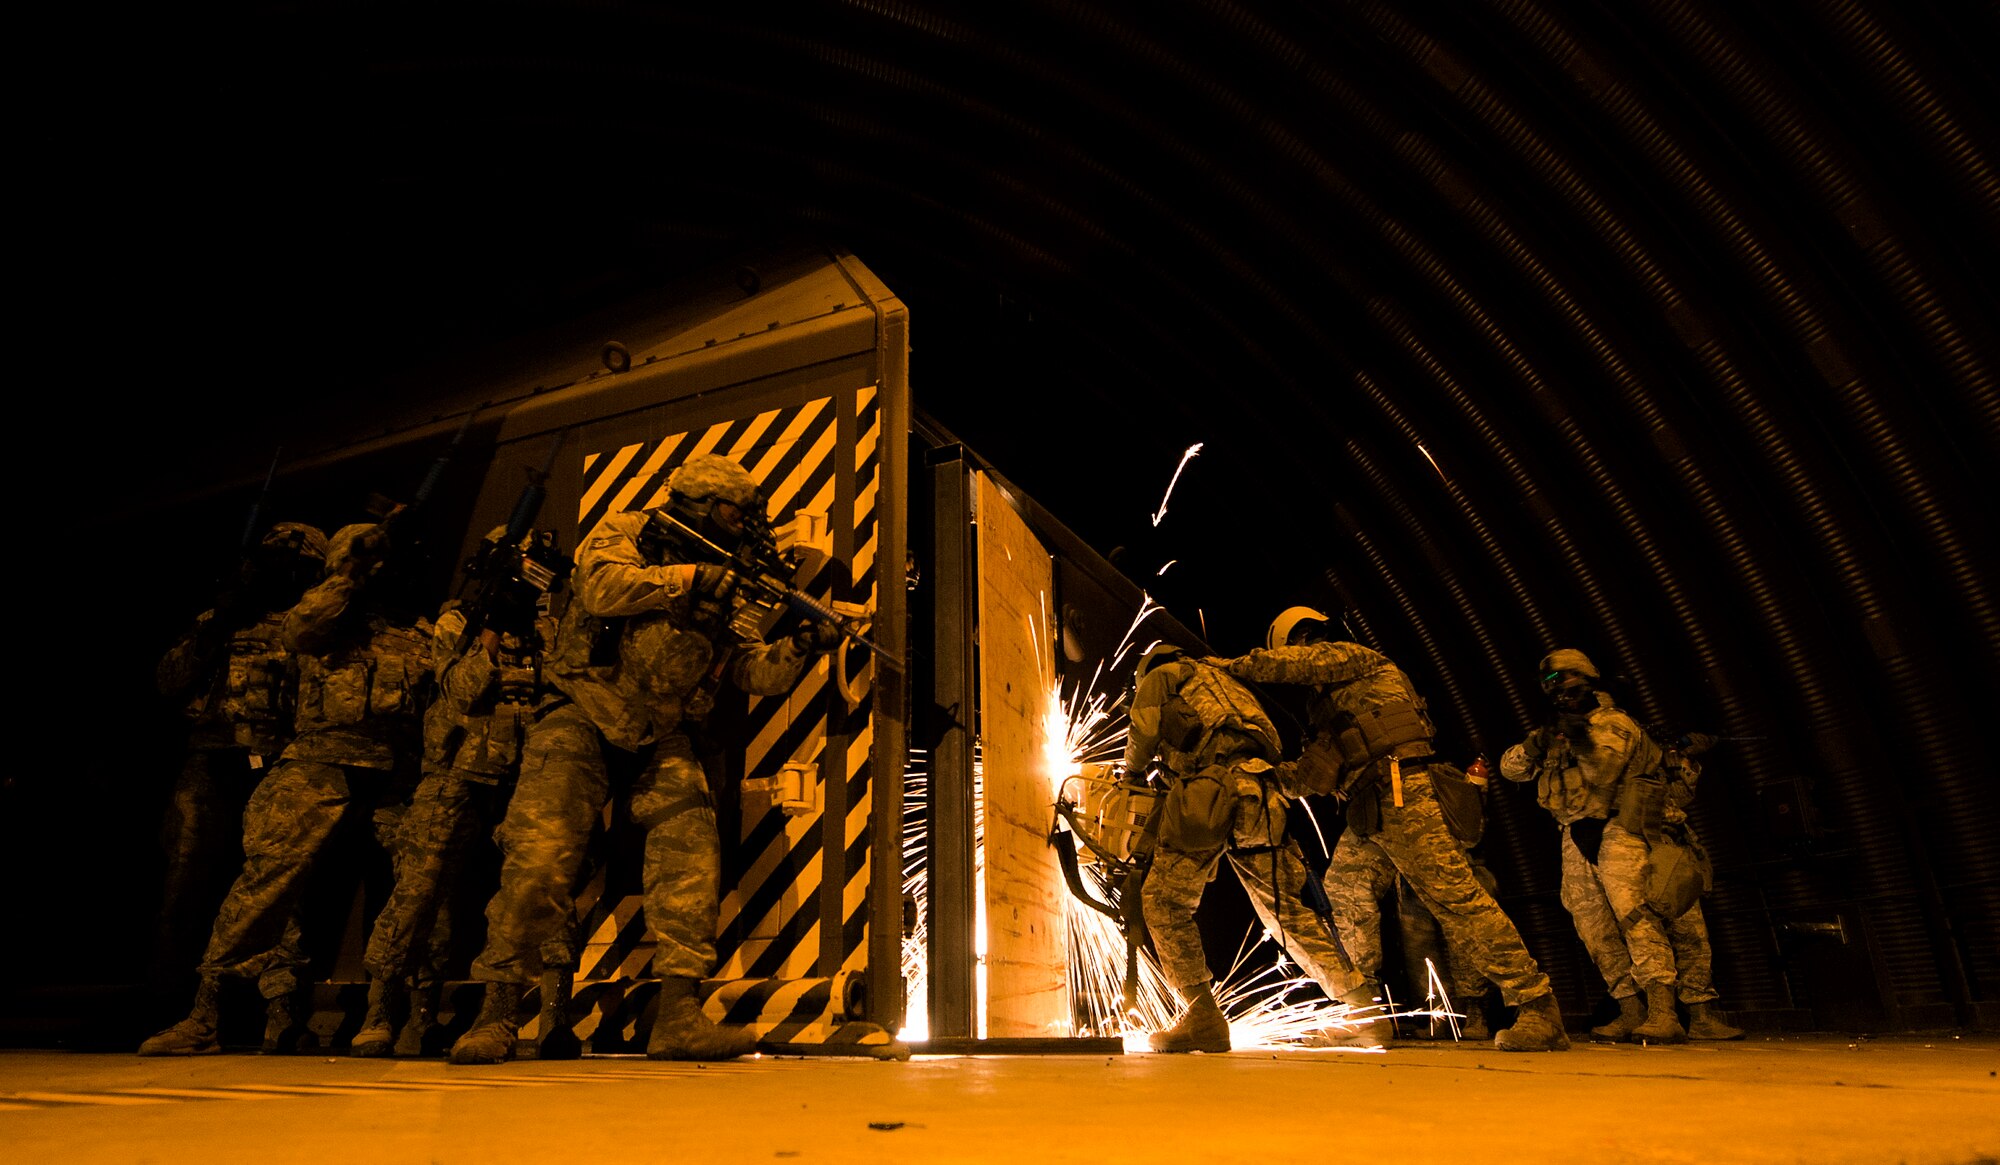 Airmen breach a door during Battlefield Leaders, Assaulters Course, March 12, 2014, Ramstein Air Base, Germany. Members of the 435th SFS taught Airmen a variety of skills during the course, including advance tactics, shooting and leadership. (U.S. Air Force photo/Senior Airman Damon Kasberg)